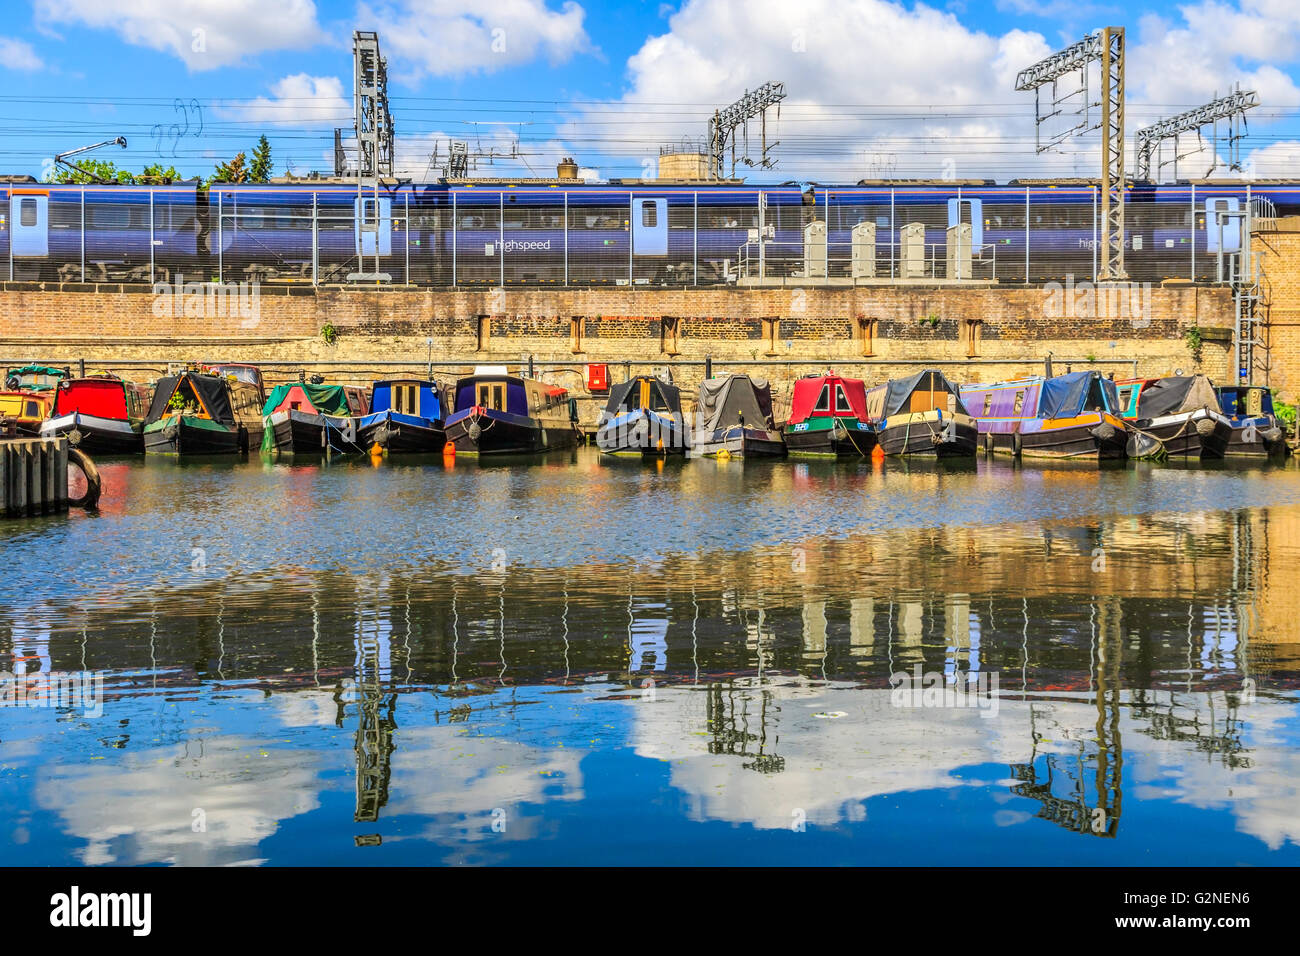 Rows of houseboats and narrow boats on the canal banks at St Pancras Yacht Basin, part of the Regent's Canal in London Stock Photo